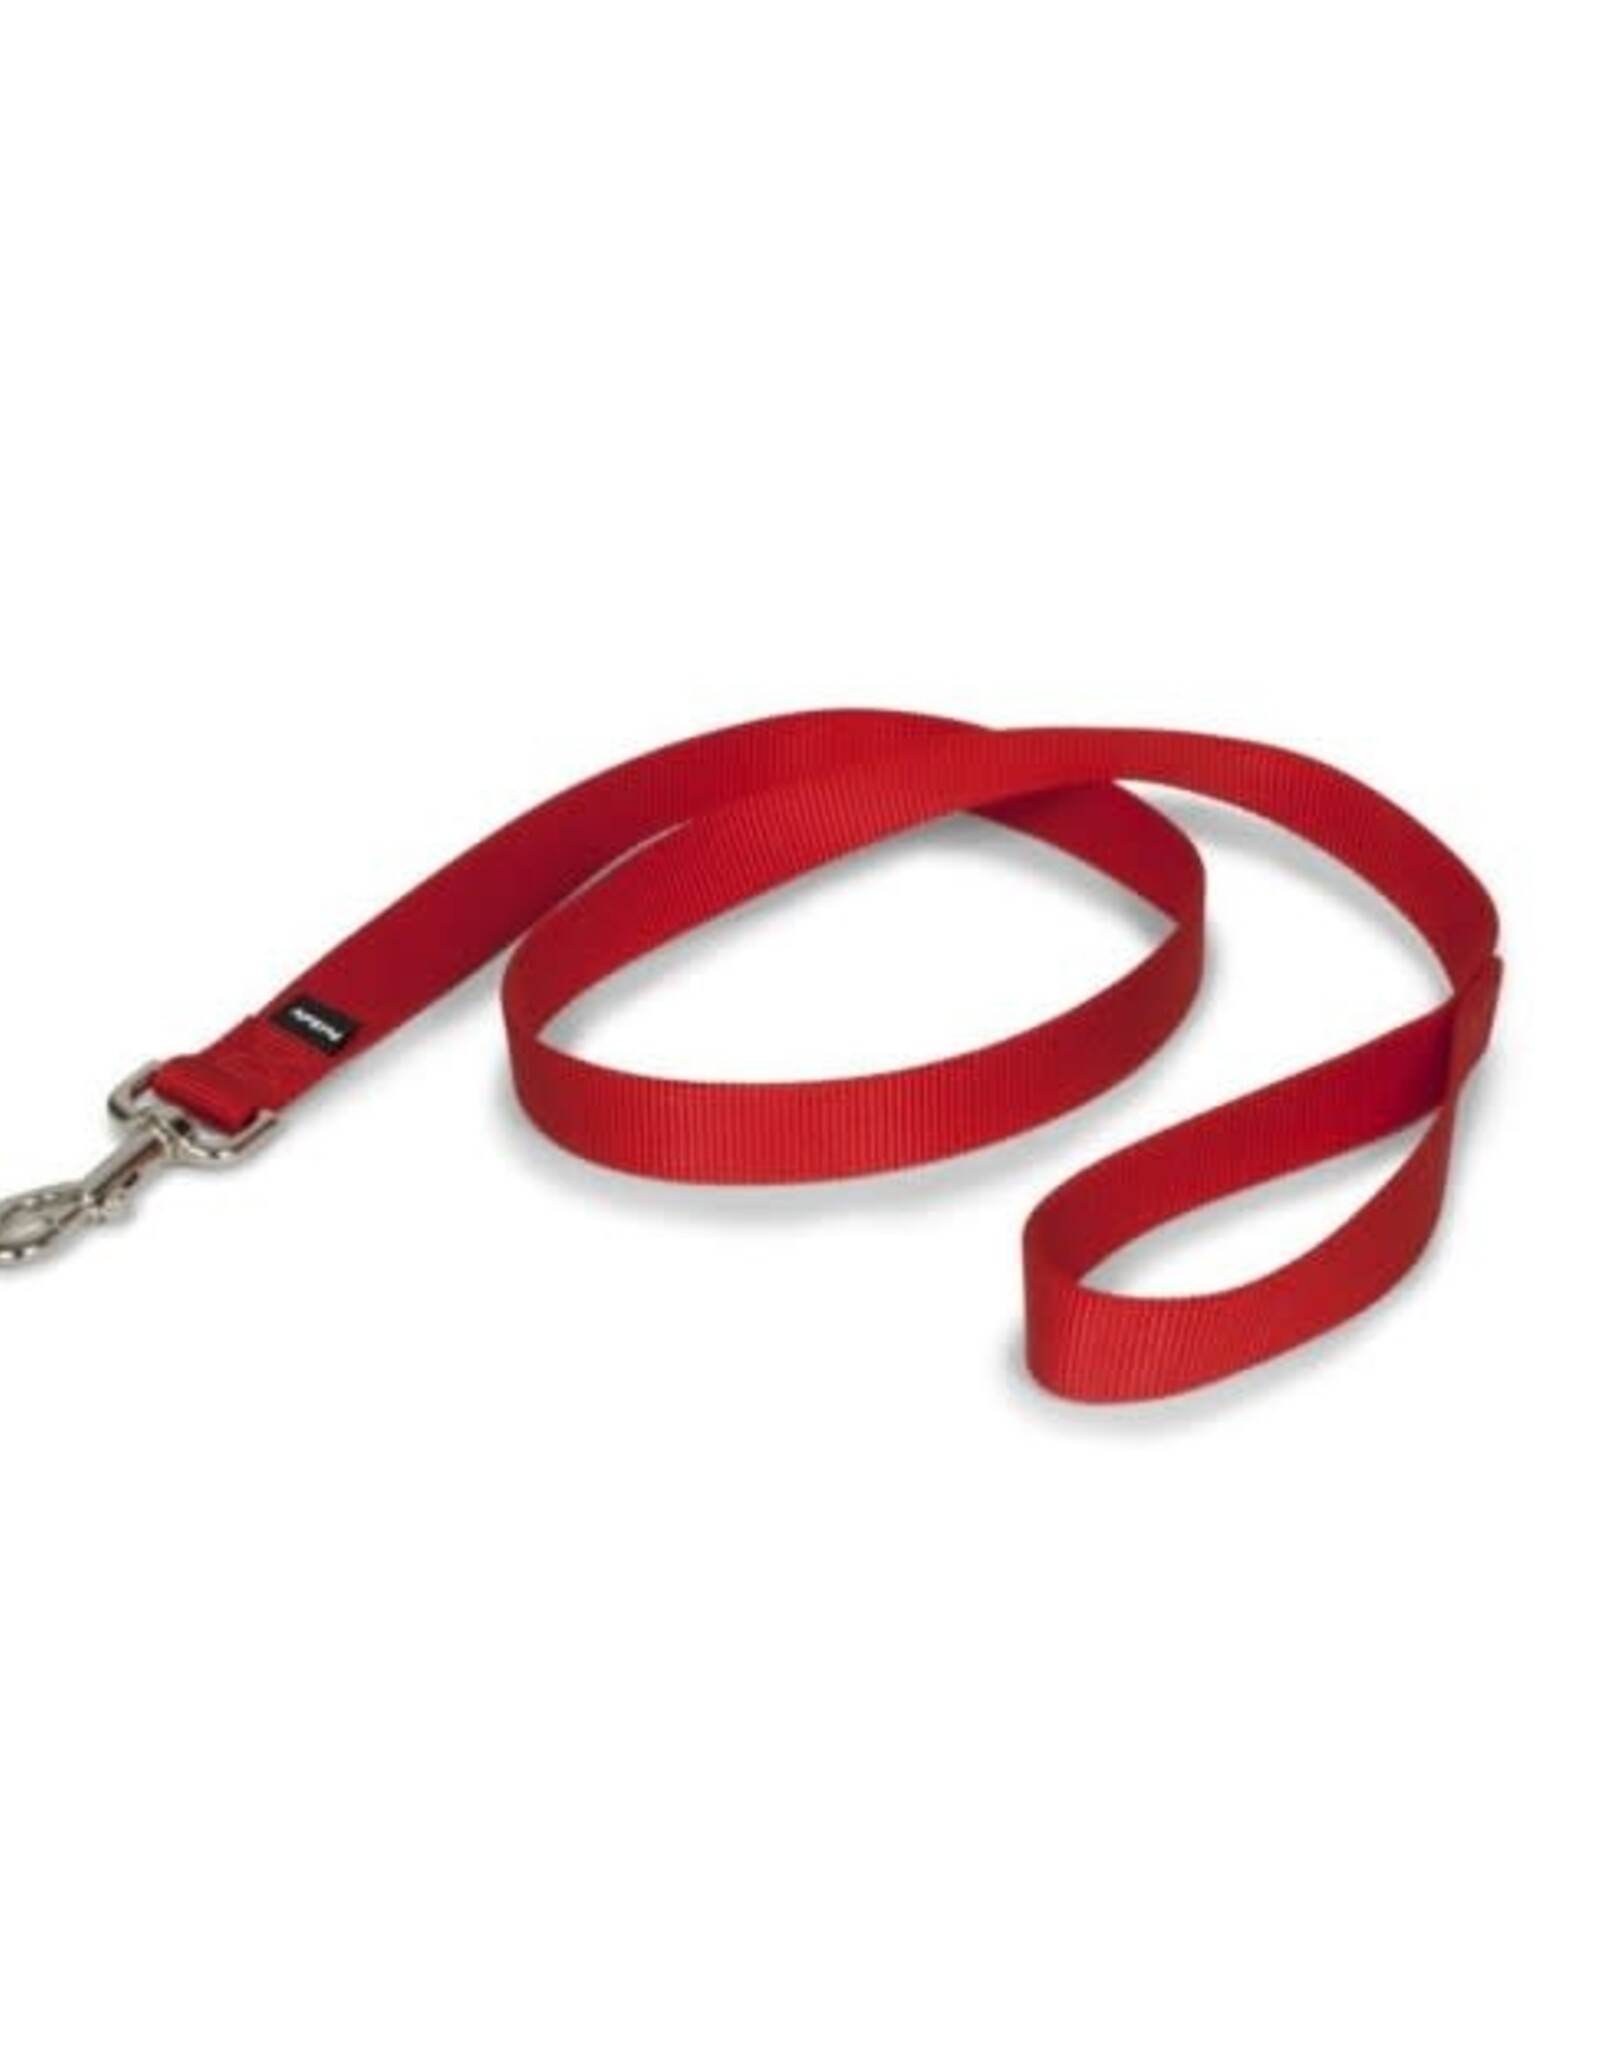 RADIO SYSTEMS CORP(PET SAFE) PREMIER Leash 3/4 x 4ft Red